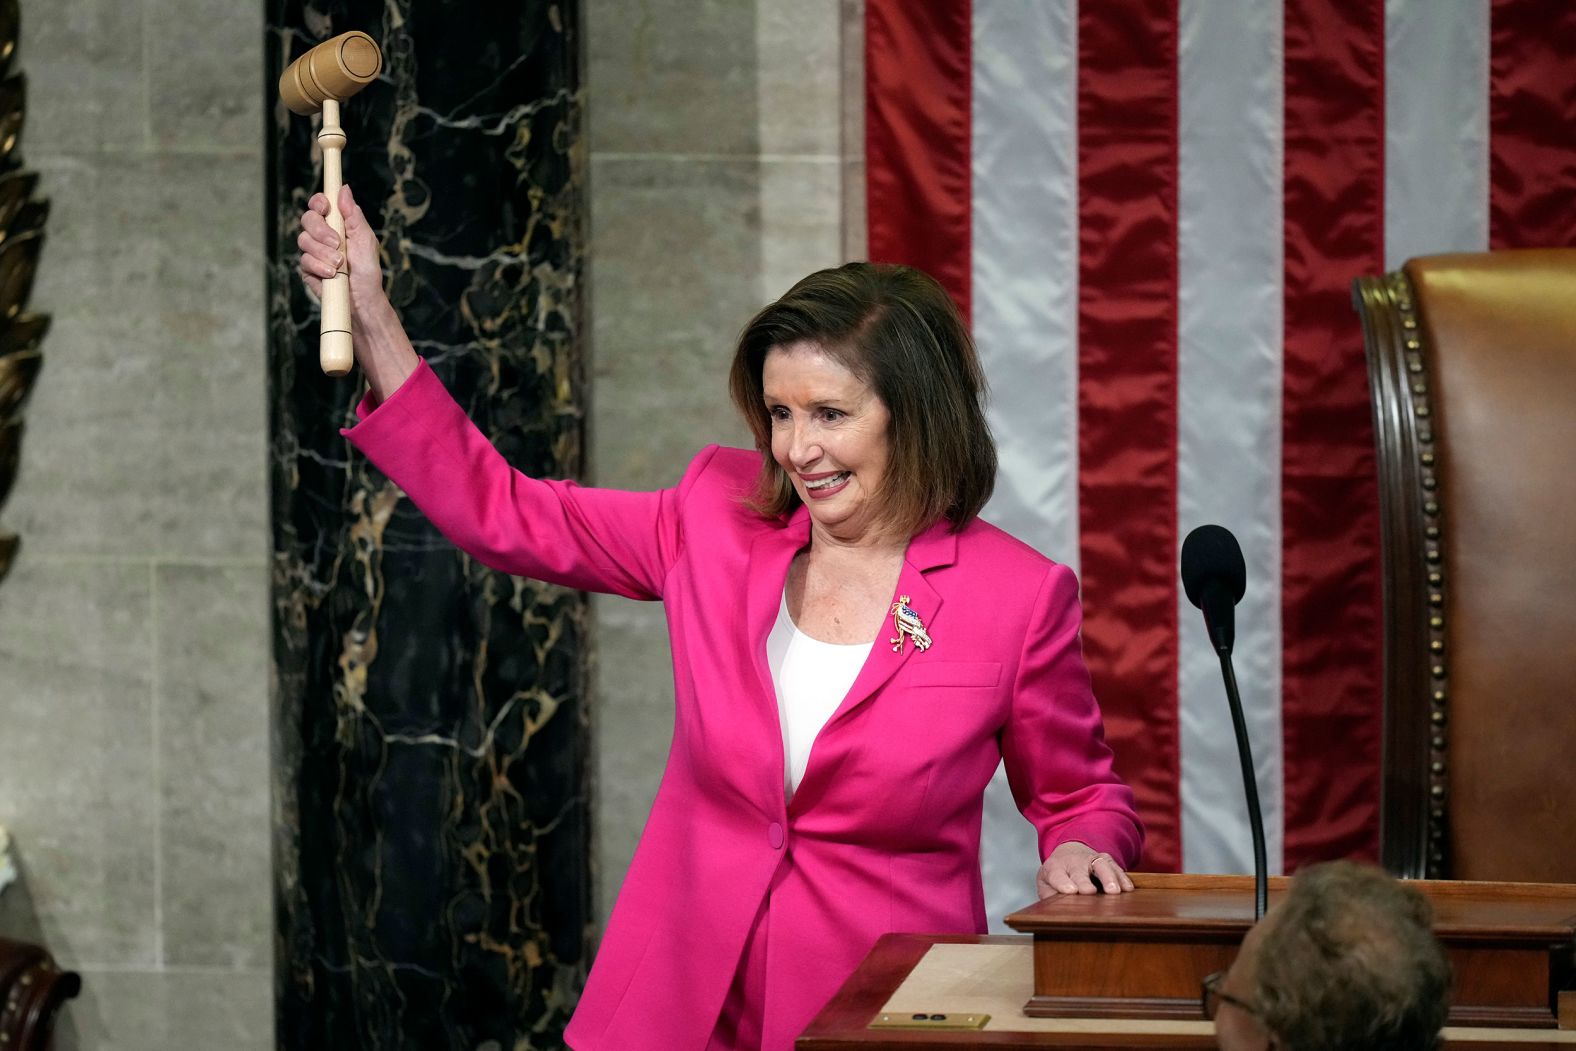 Outgoing US House Speaker <a href="http://www.cnn.com/2022/11/17/politics/gallery/nancy-pelosi/index.html" target="_blank">Nancy Pelosi</a> holds the gavel as she calls the House to order on Tuesday, January 3.